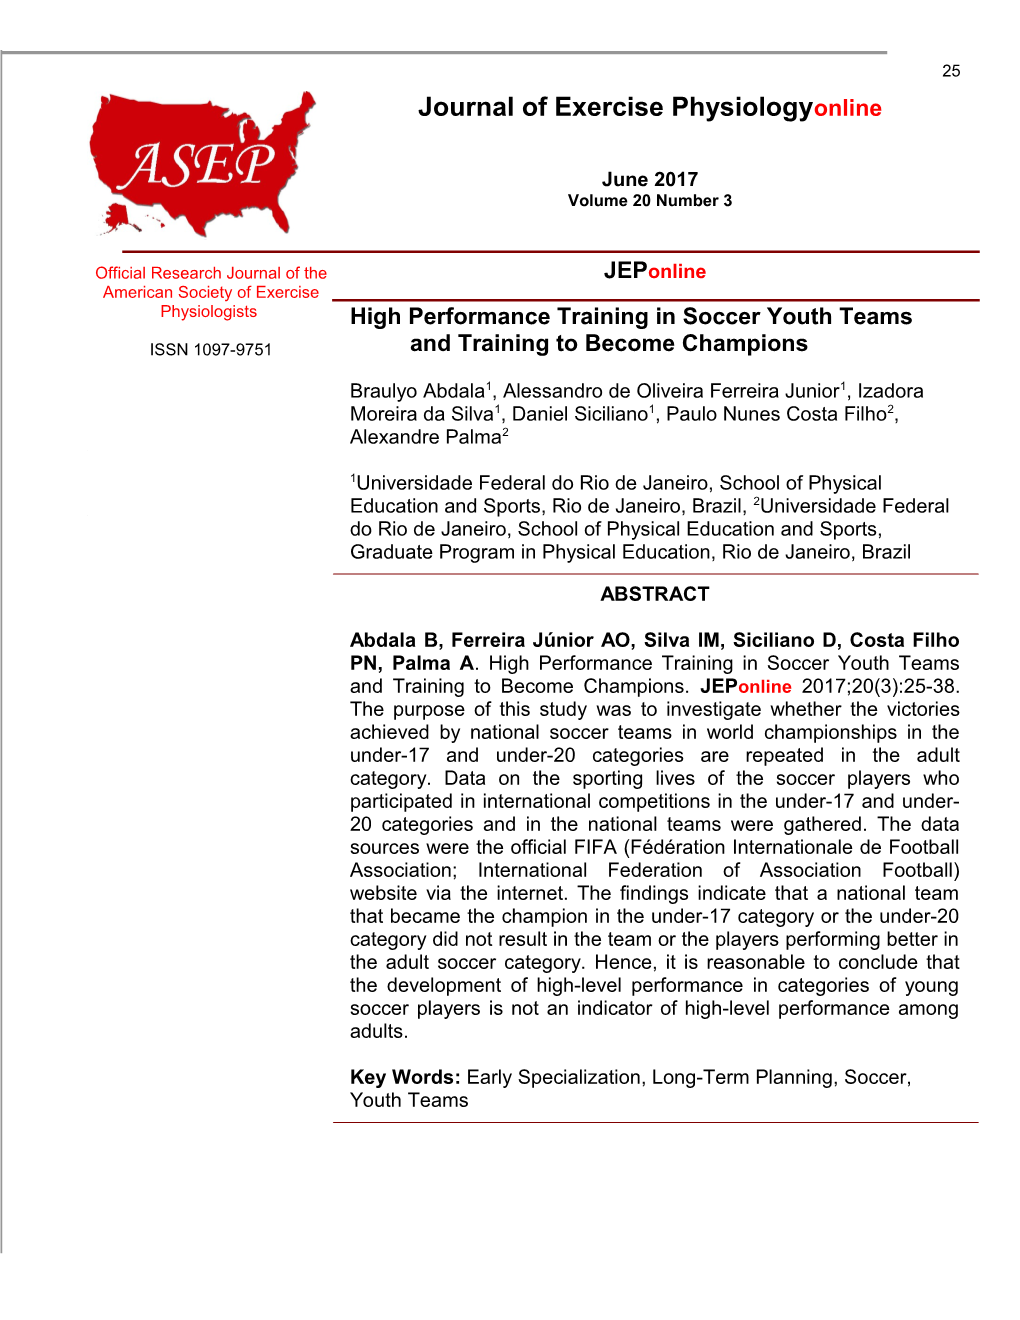 High Performance Training in Soccer Youth Teams and Training to Become Champions